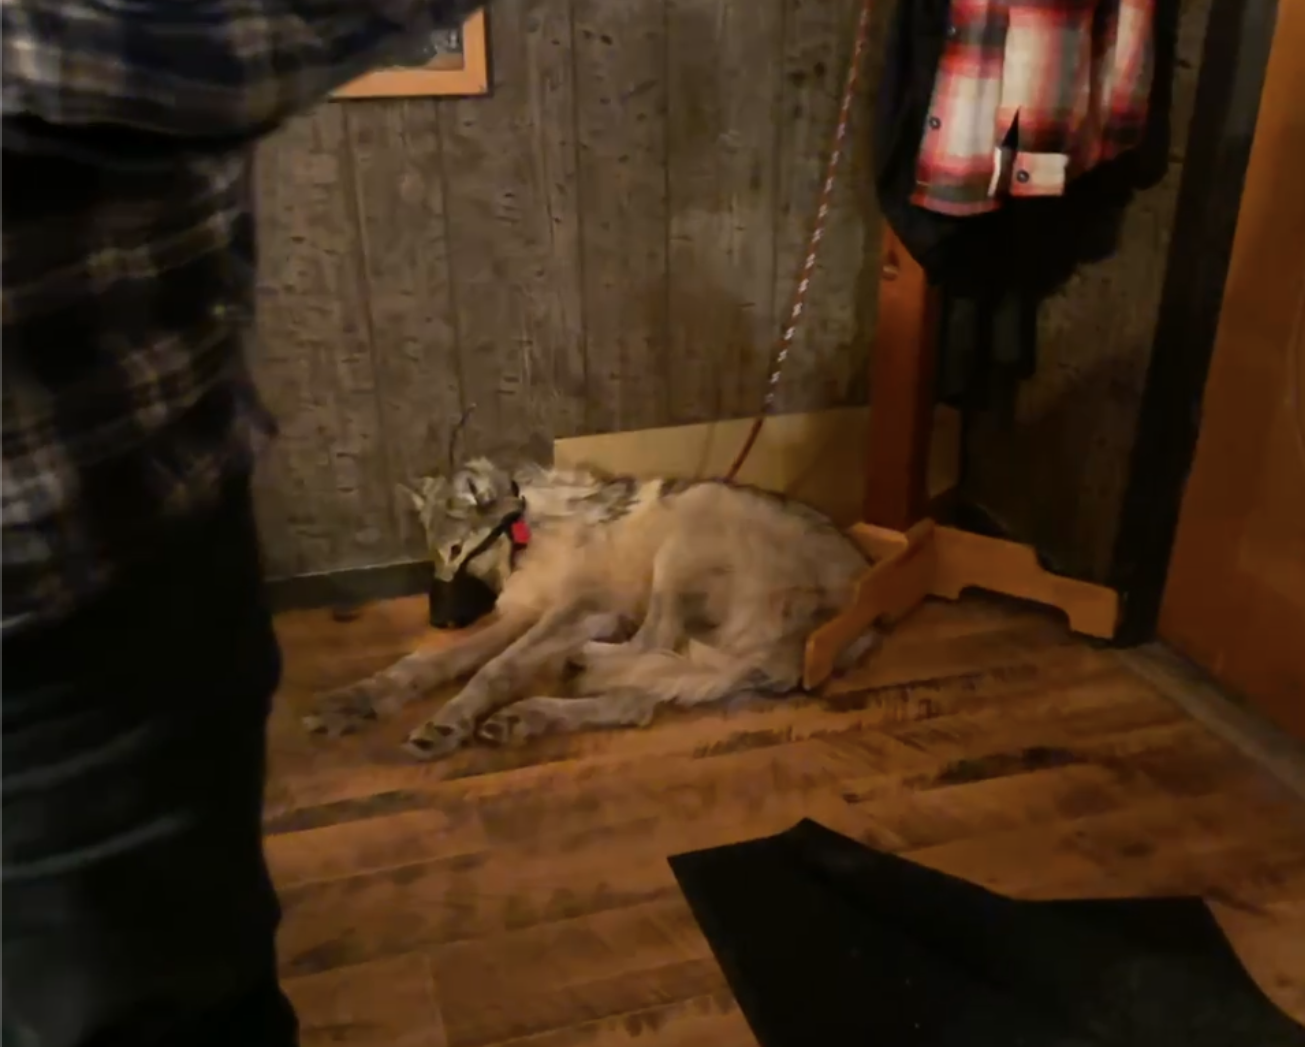 A Wyoming wolf was hit by a snowmobiler and paraded around a bar.